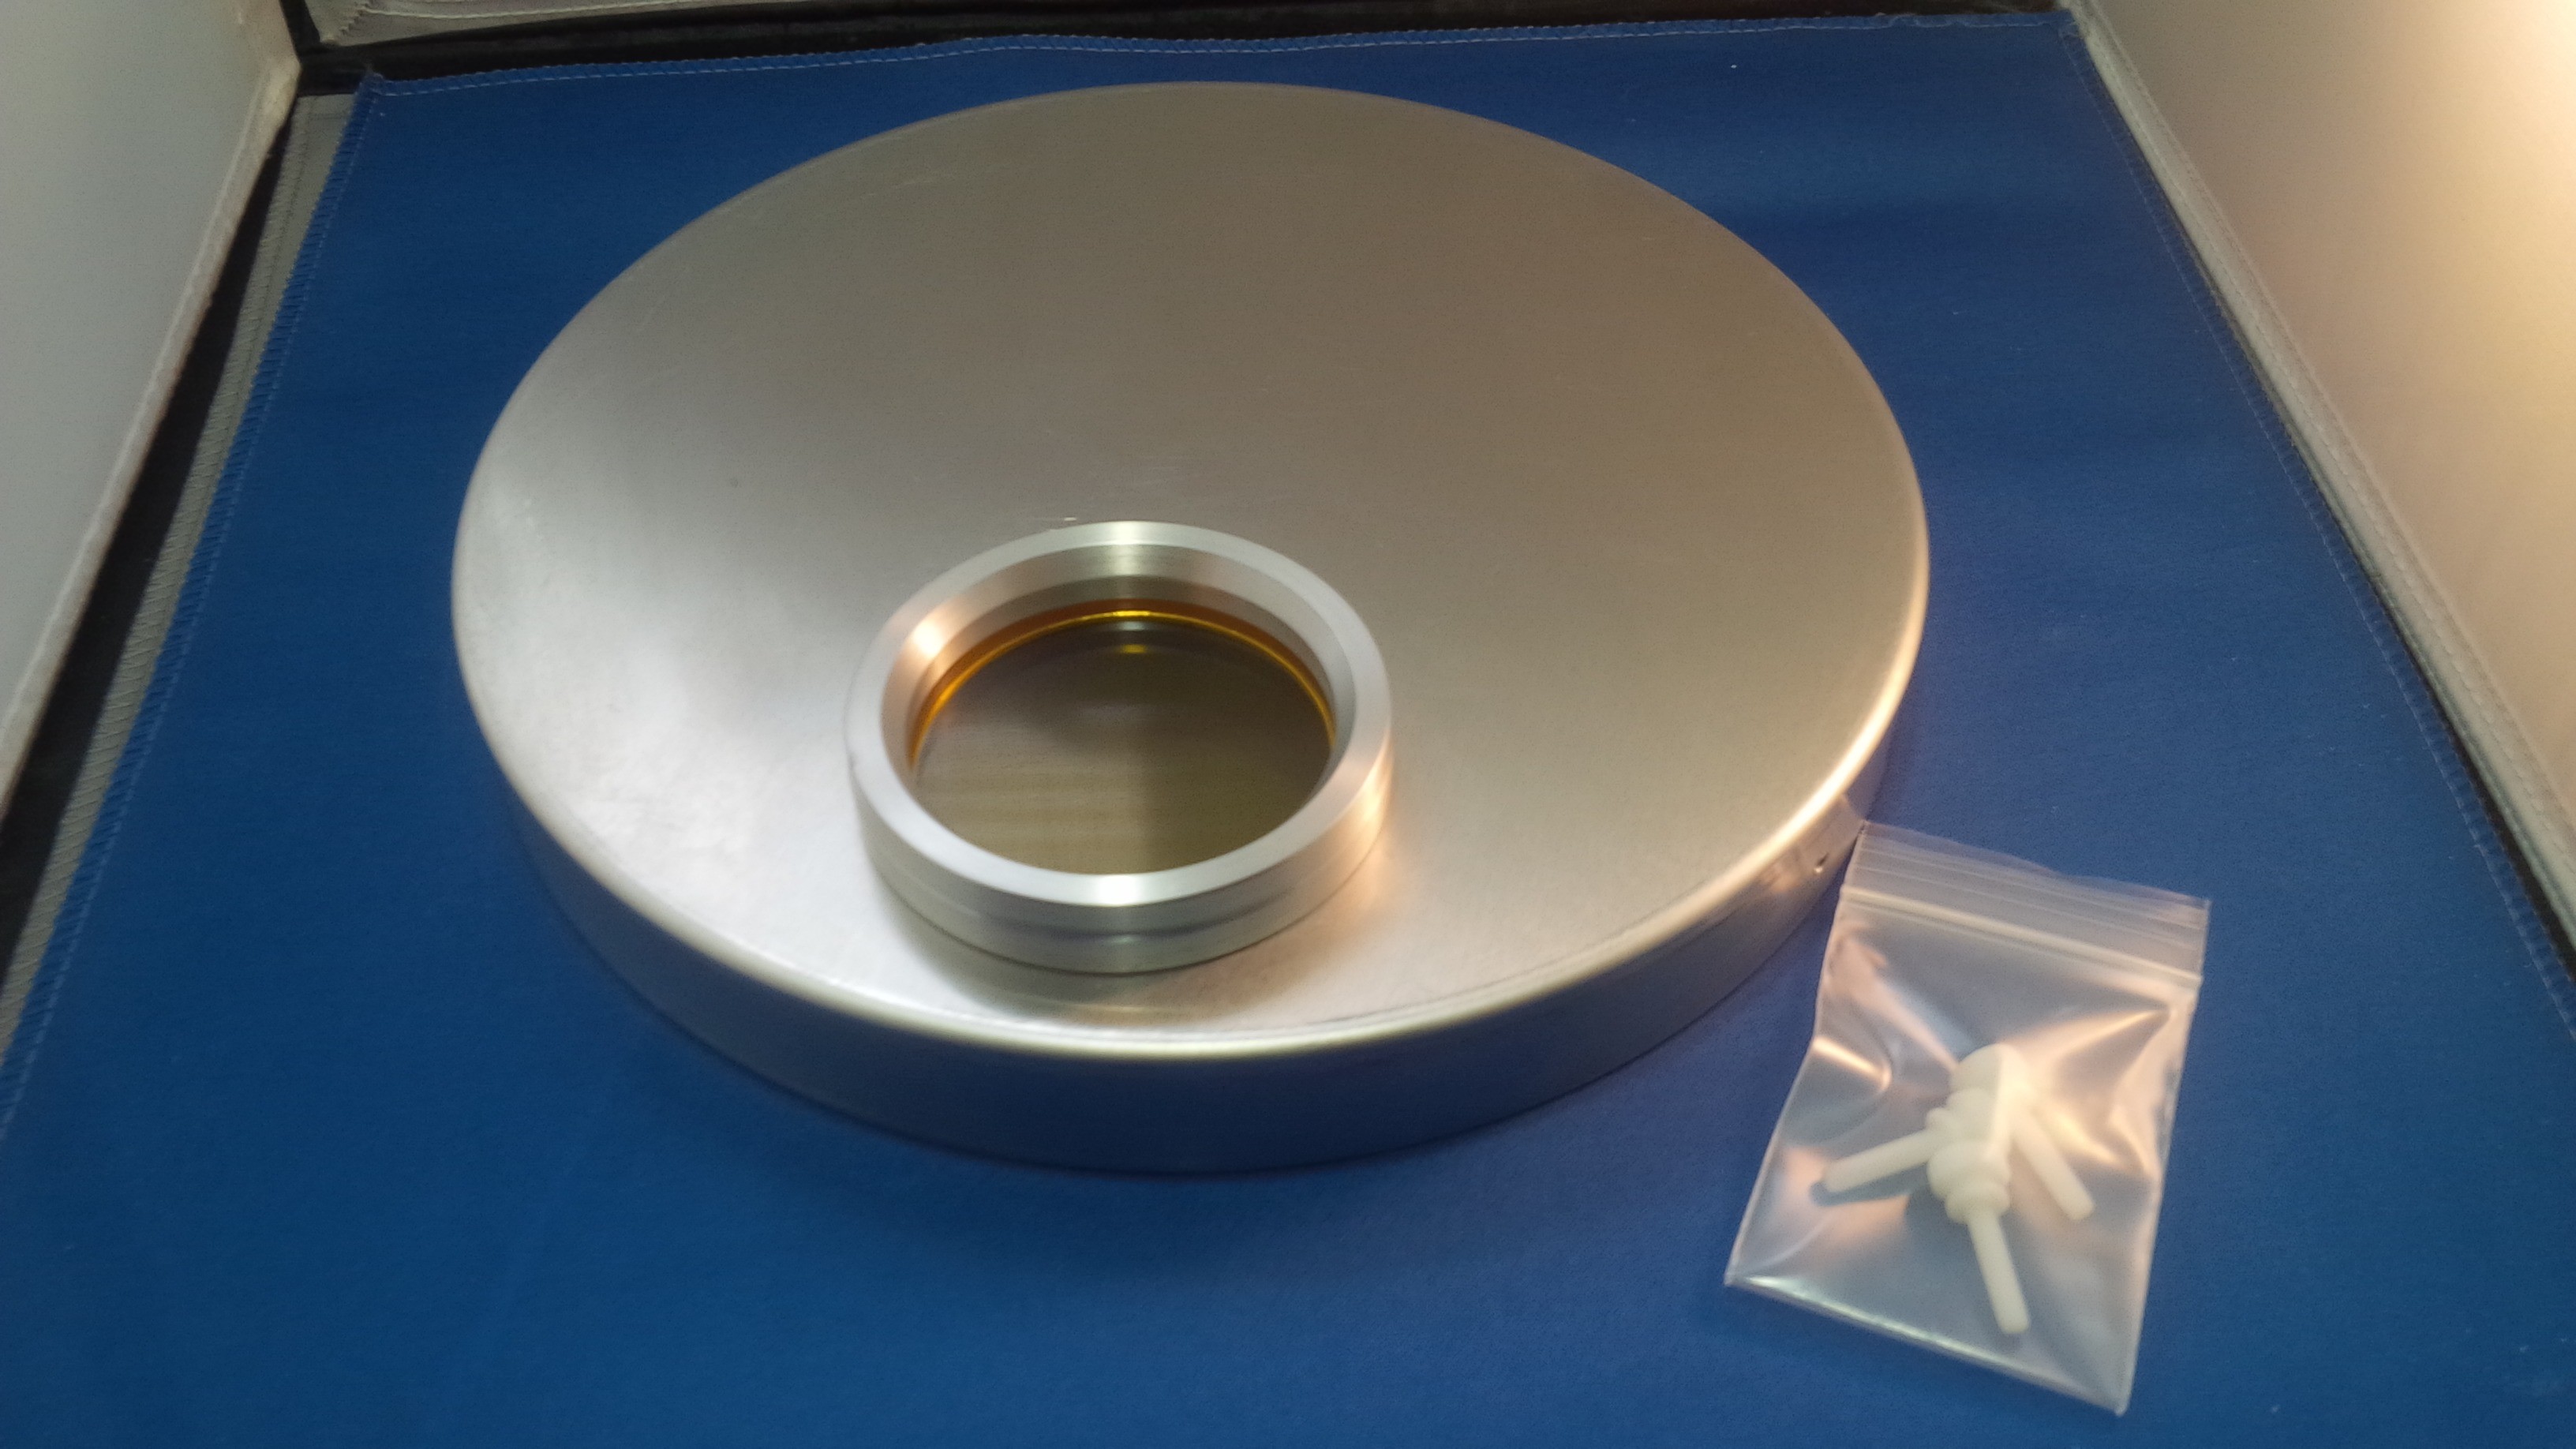 Off axis ERF for 11" SCT (90mm)